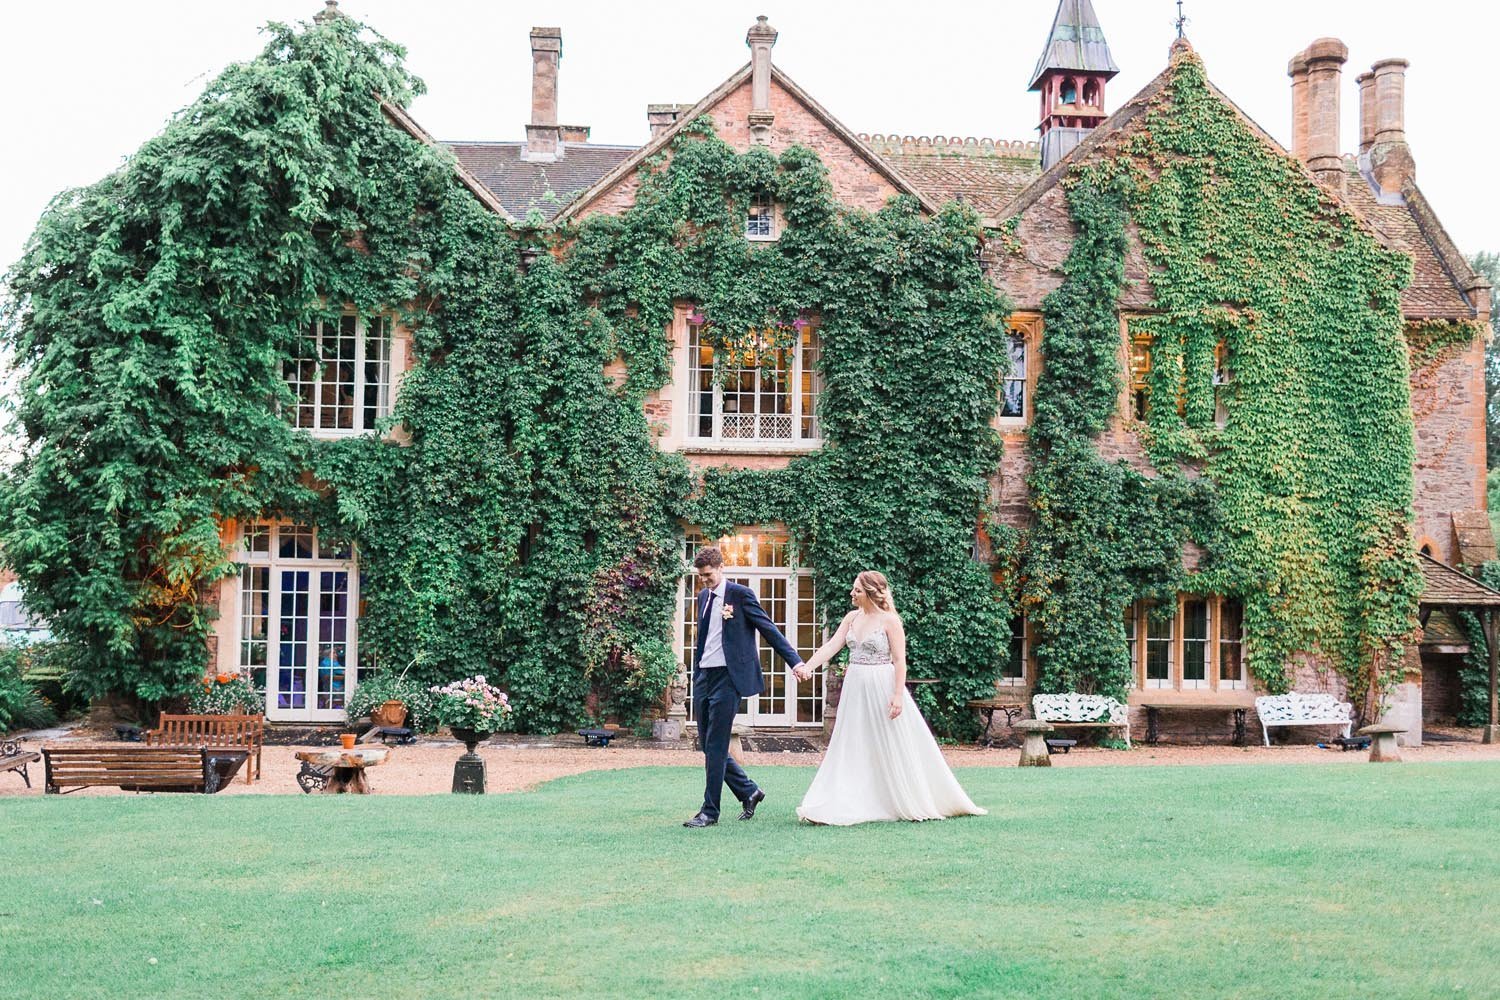 Bride and groom walking hand in hand outside an ivy-covered manor house in the English countryside 